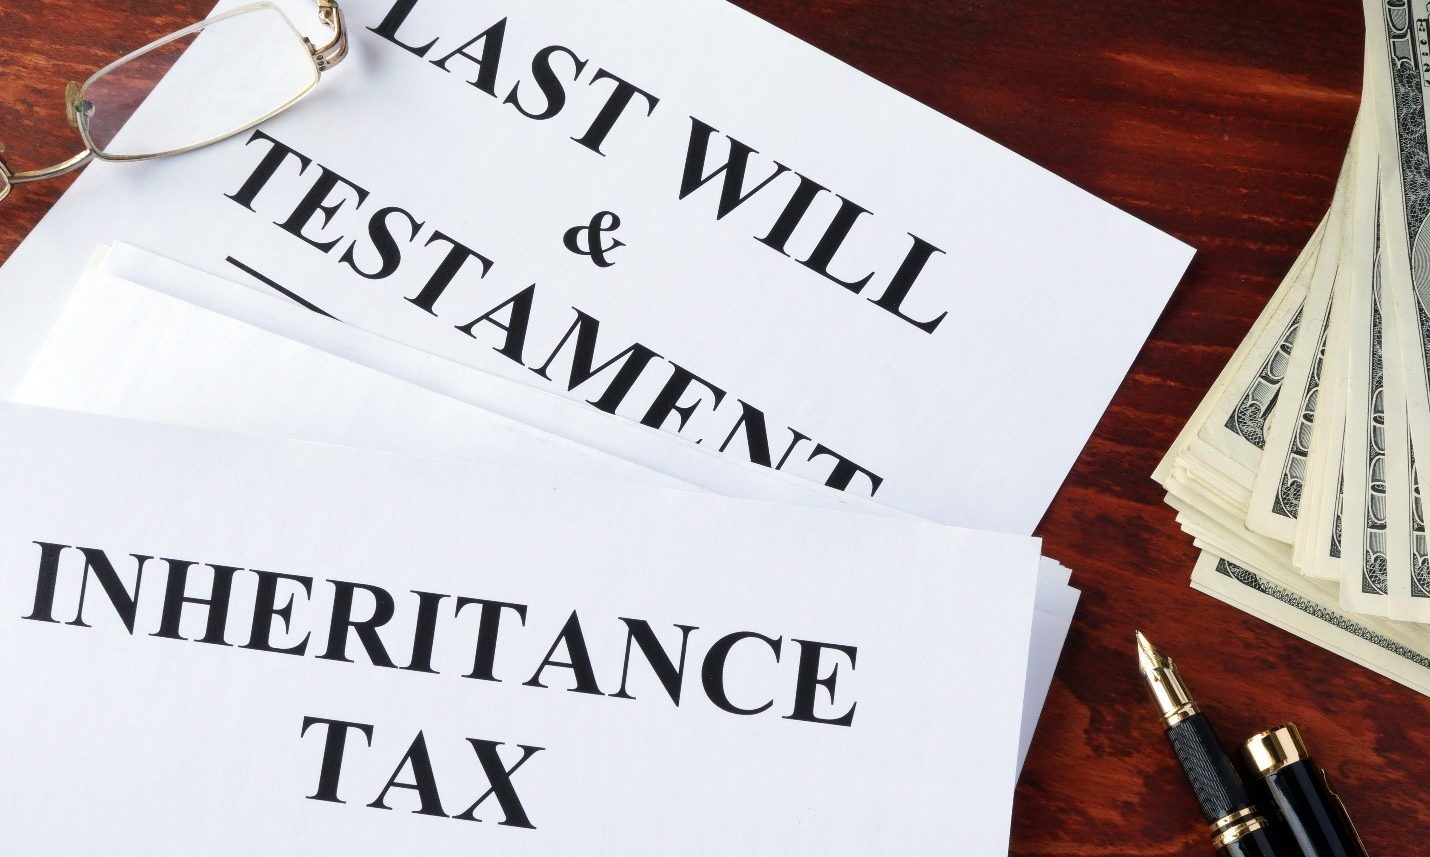 Inheritance & Testament and taxes